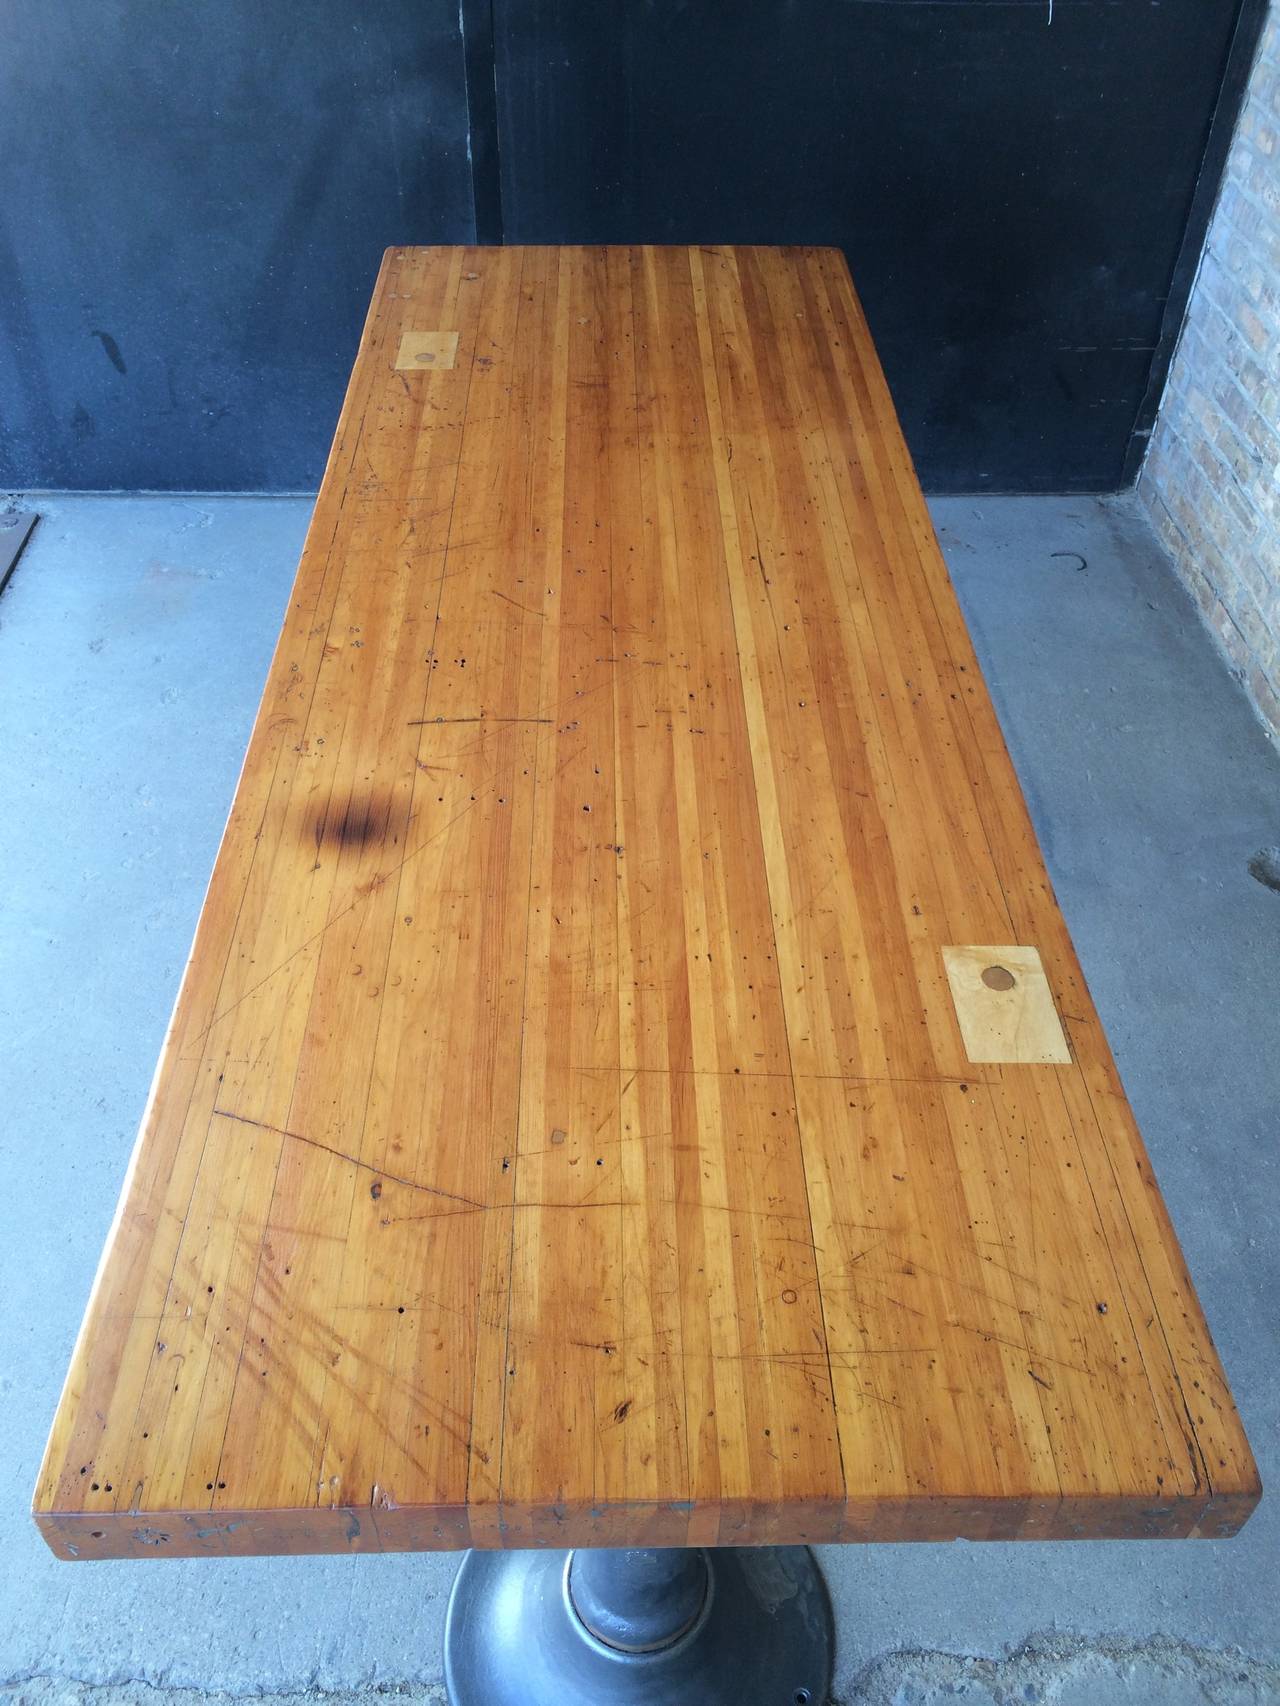 Vintage Industrial  Bar Height Work Table In Distressed Condition For Sale In Minneapolis, MN